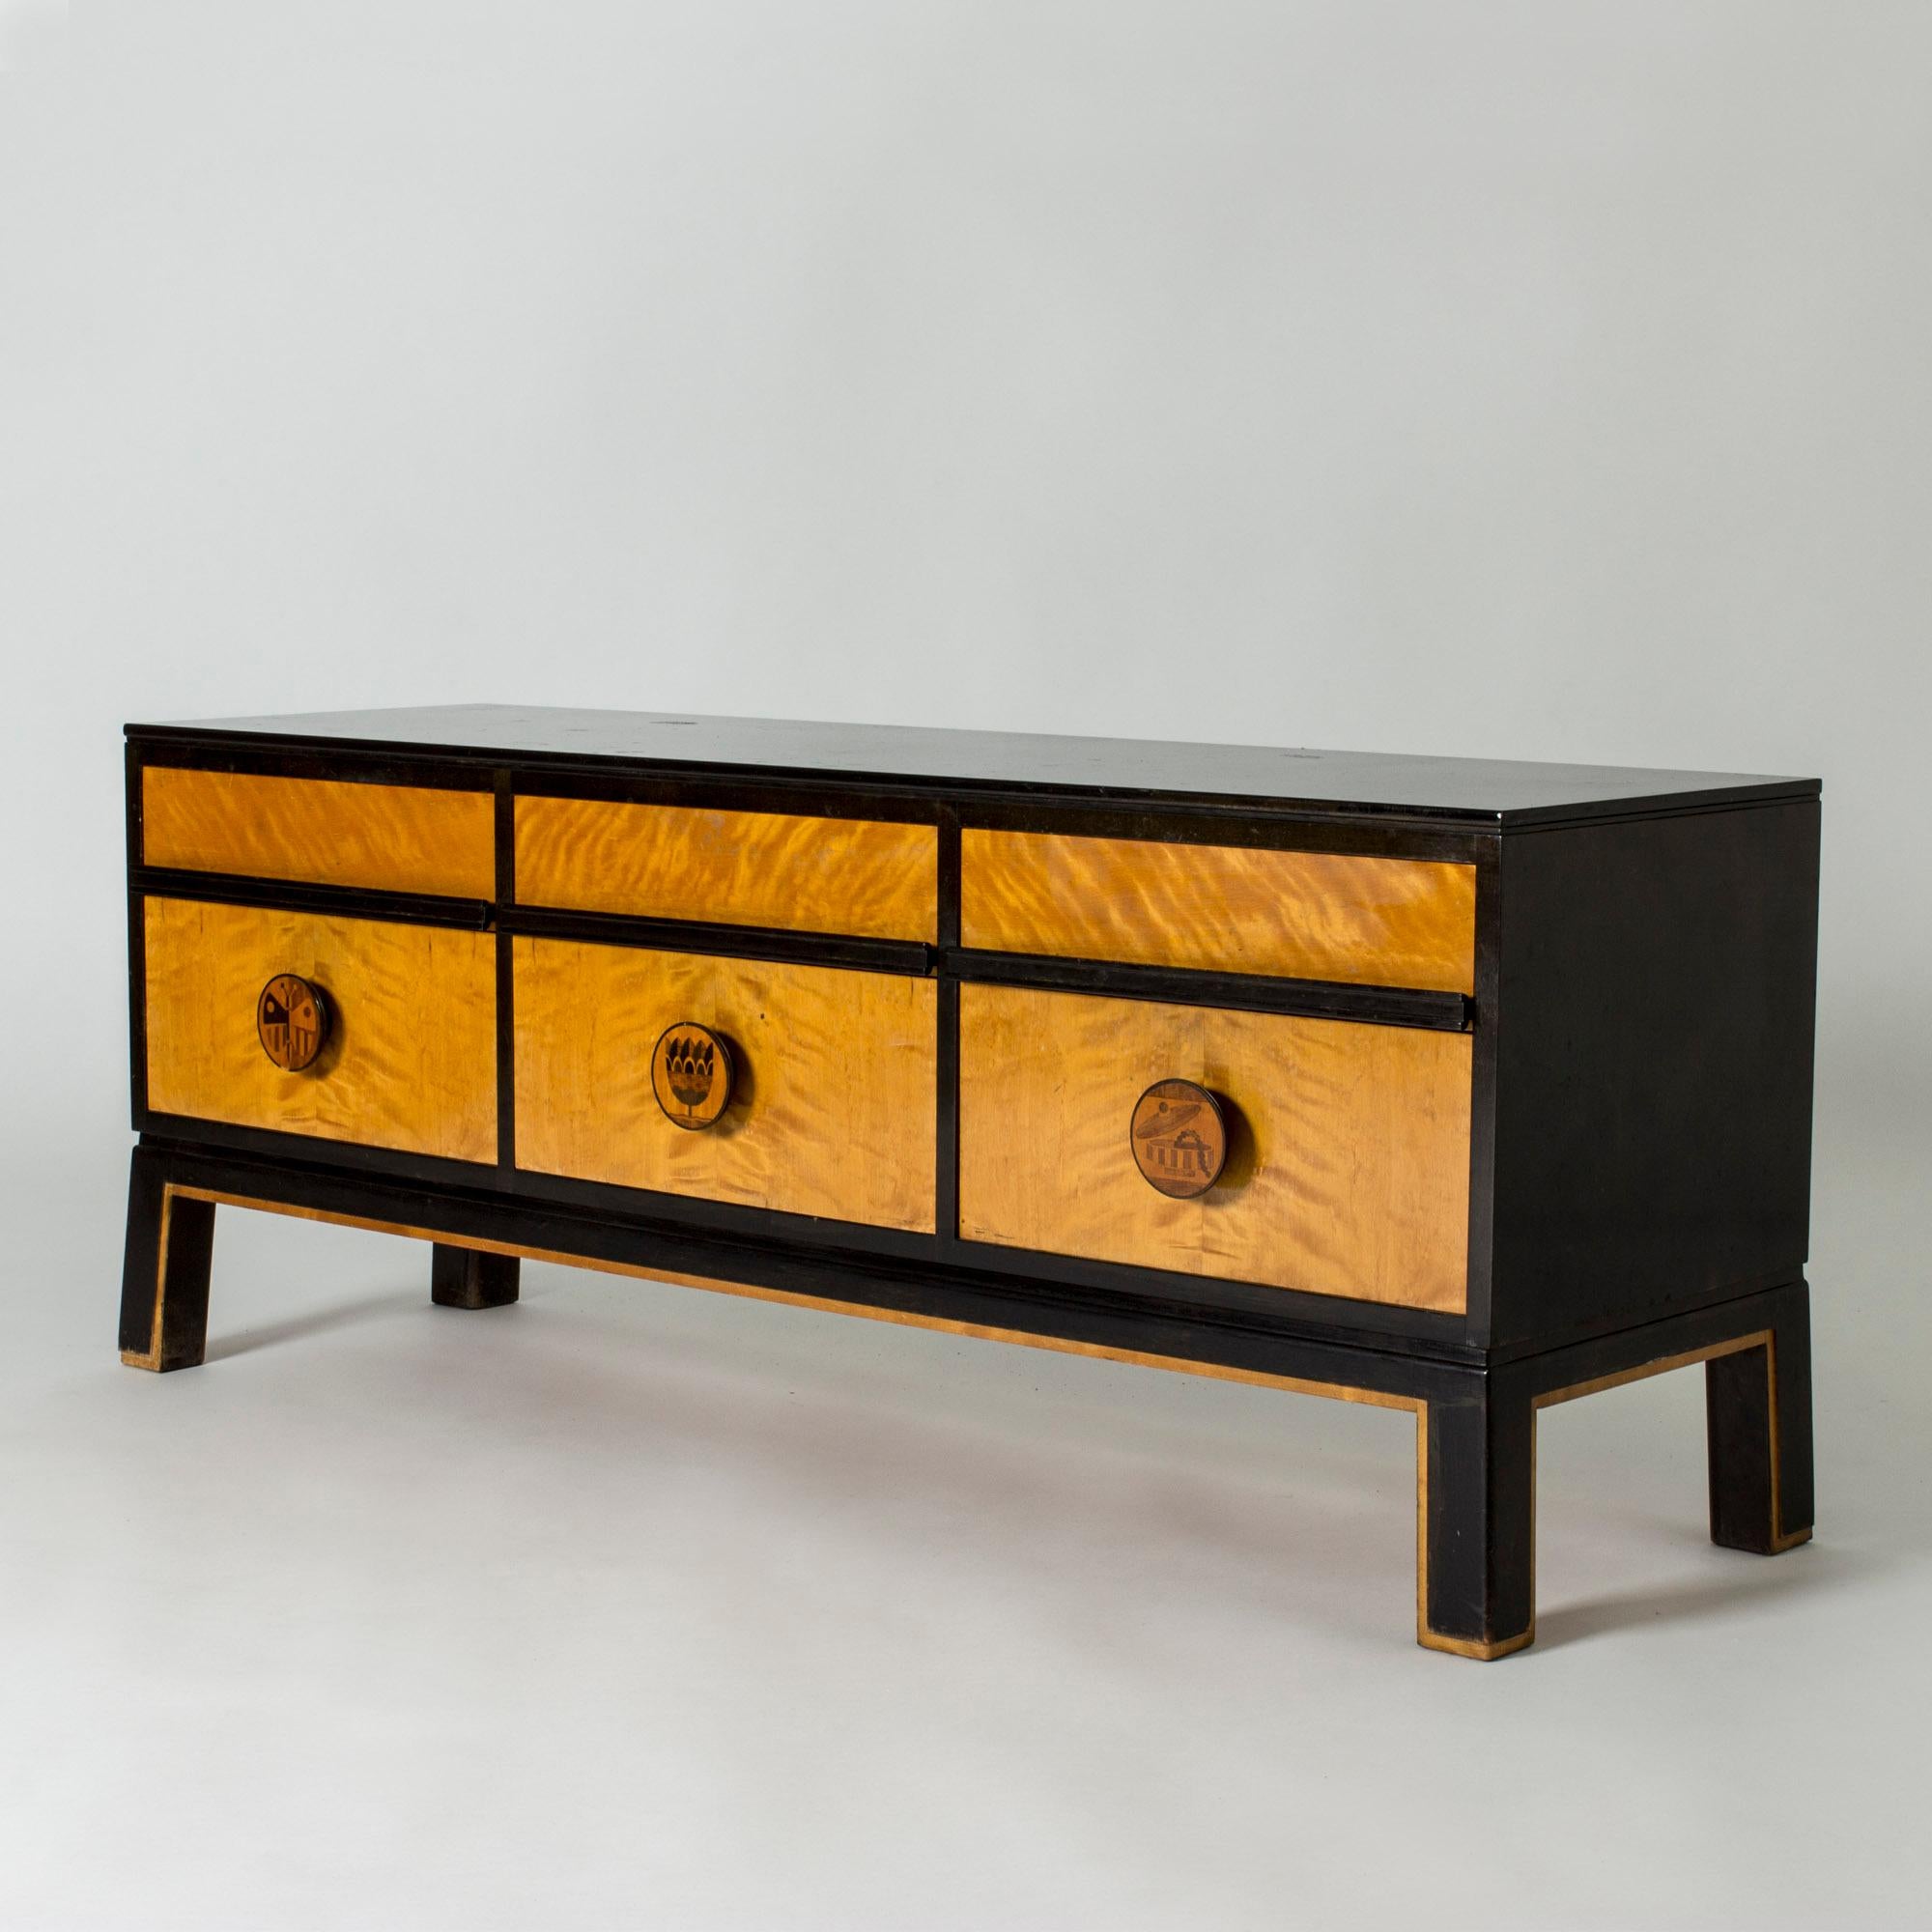 Elegant functionalist sideboard by Otto Schulz, with bold lines and contrasting birch and darker colored wood. Large round drawer handles with decorative inlayed motifs depicting a butterfly, a tulip and a jar with a string of pearls.